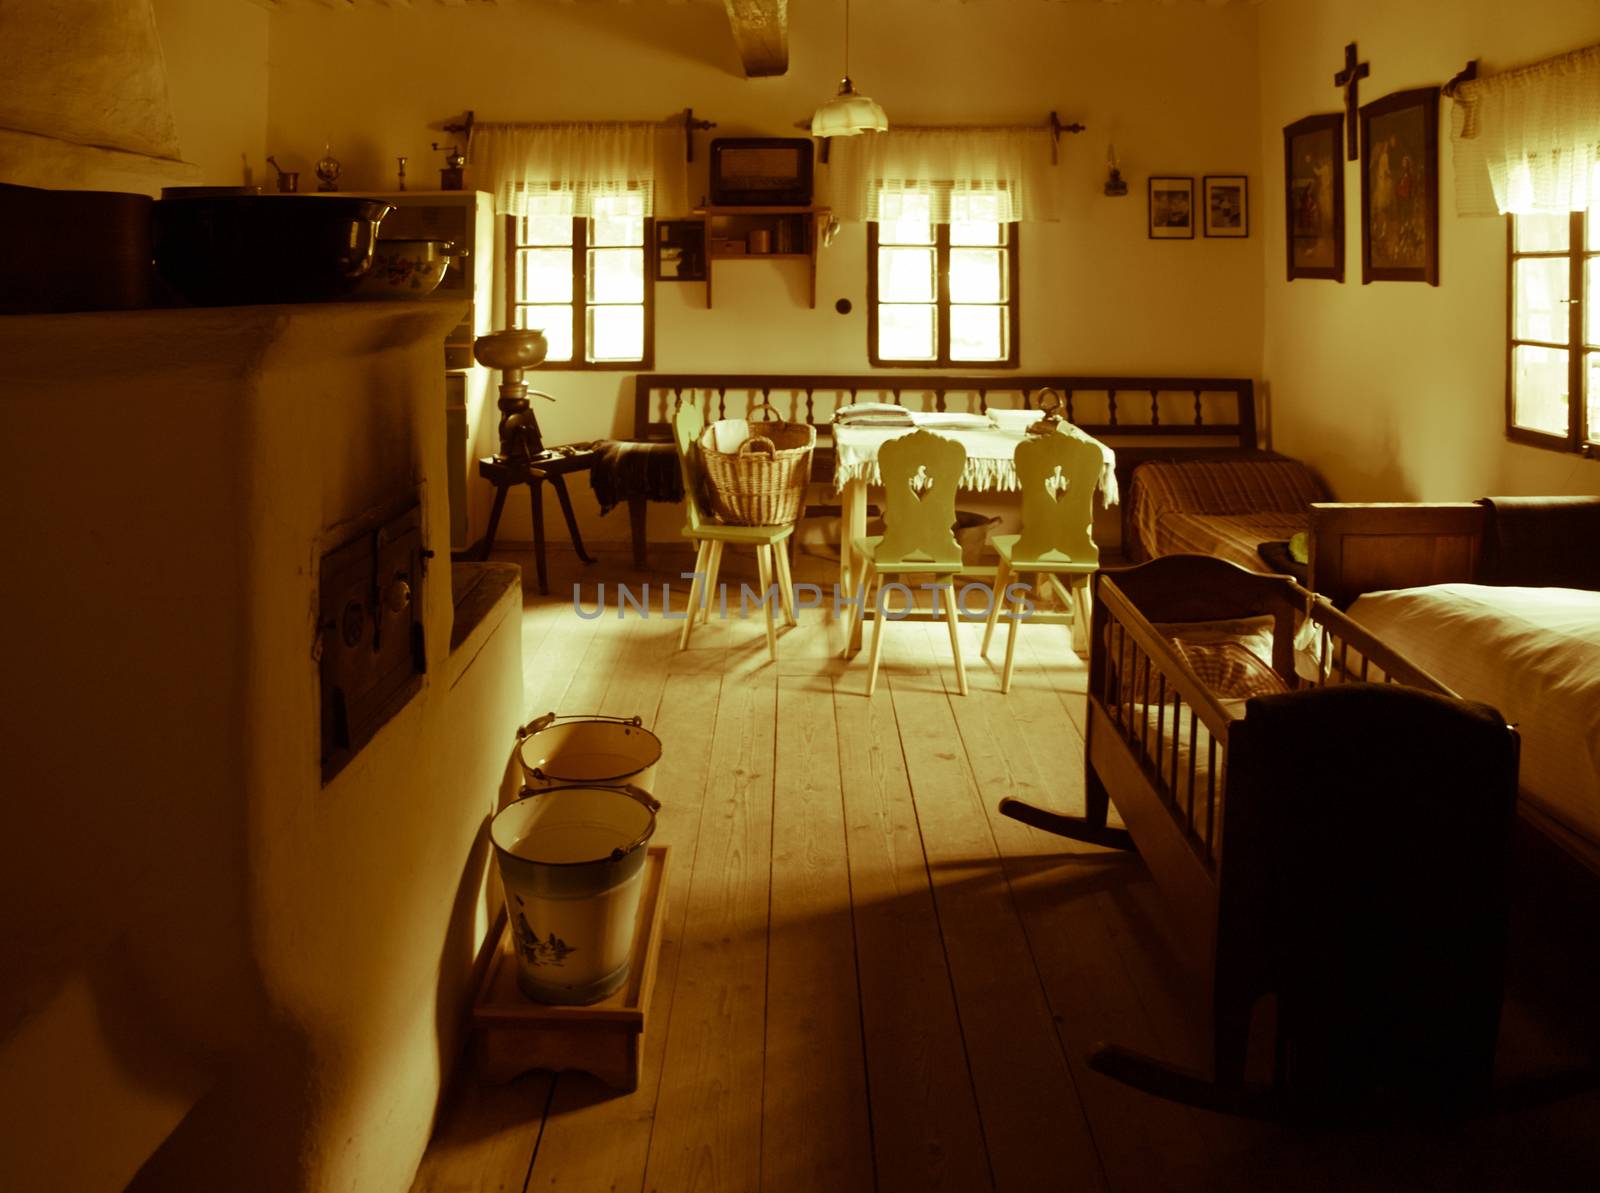 Vintage room with bed, cradle, furnace, table and chairs in old rural house. Sepia style image by pyty